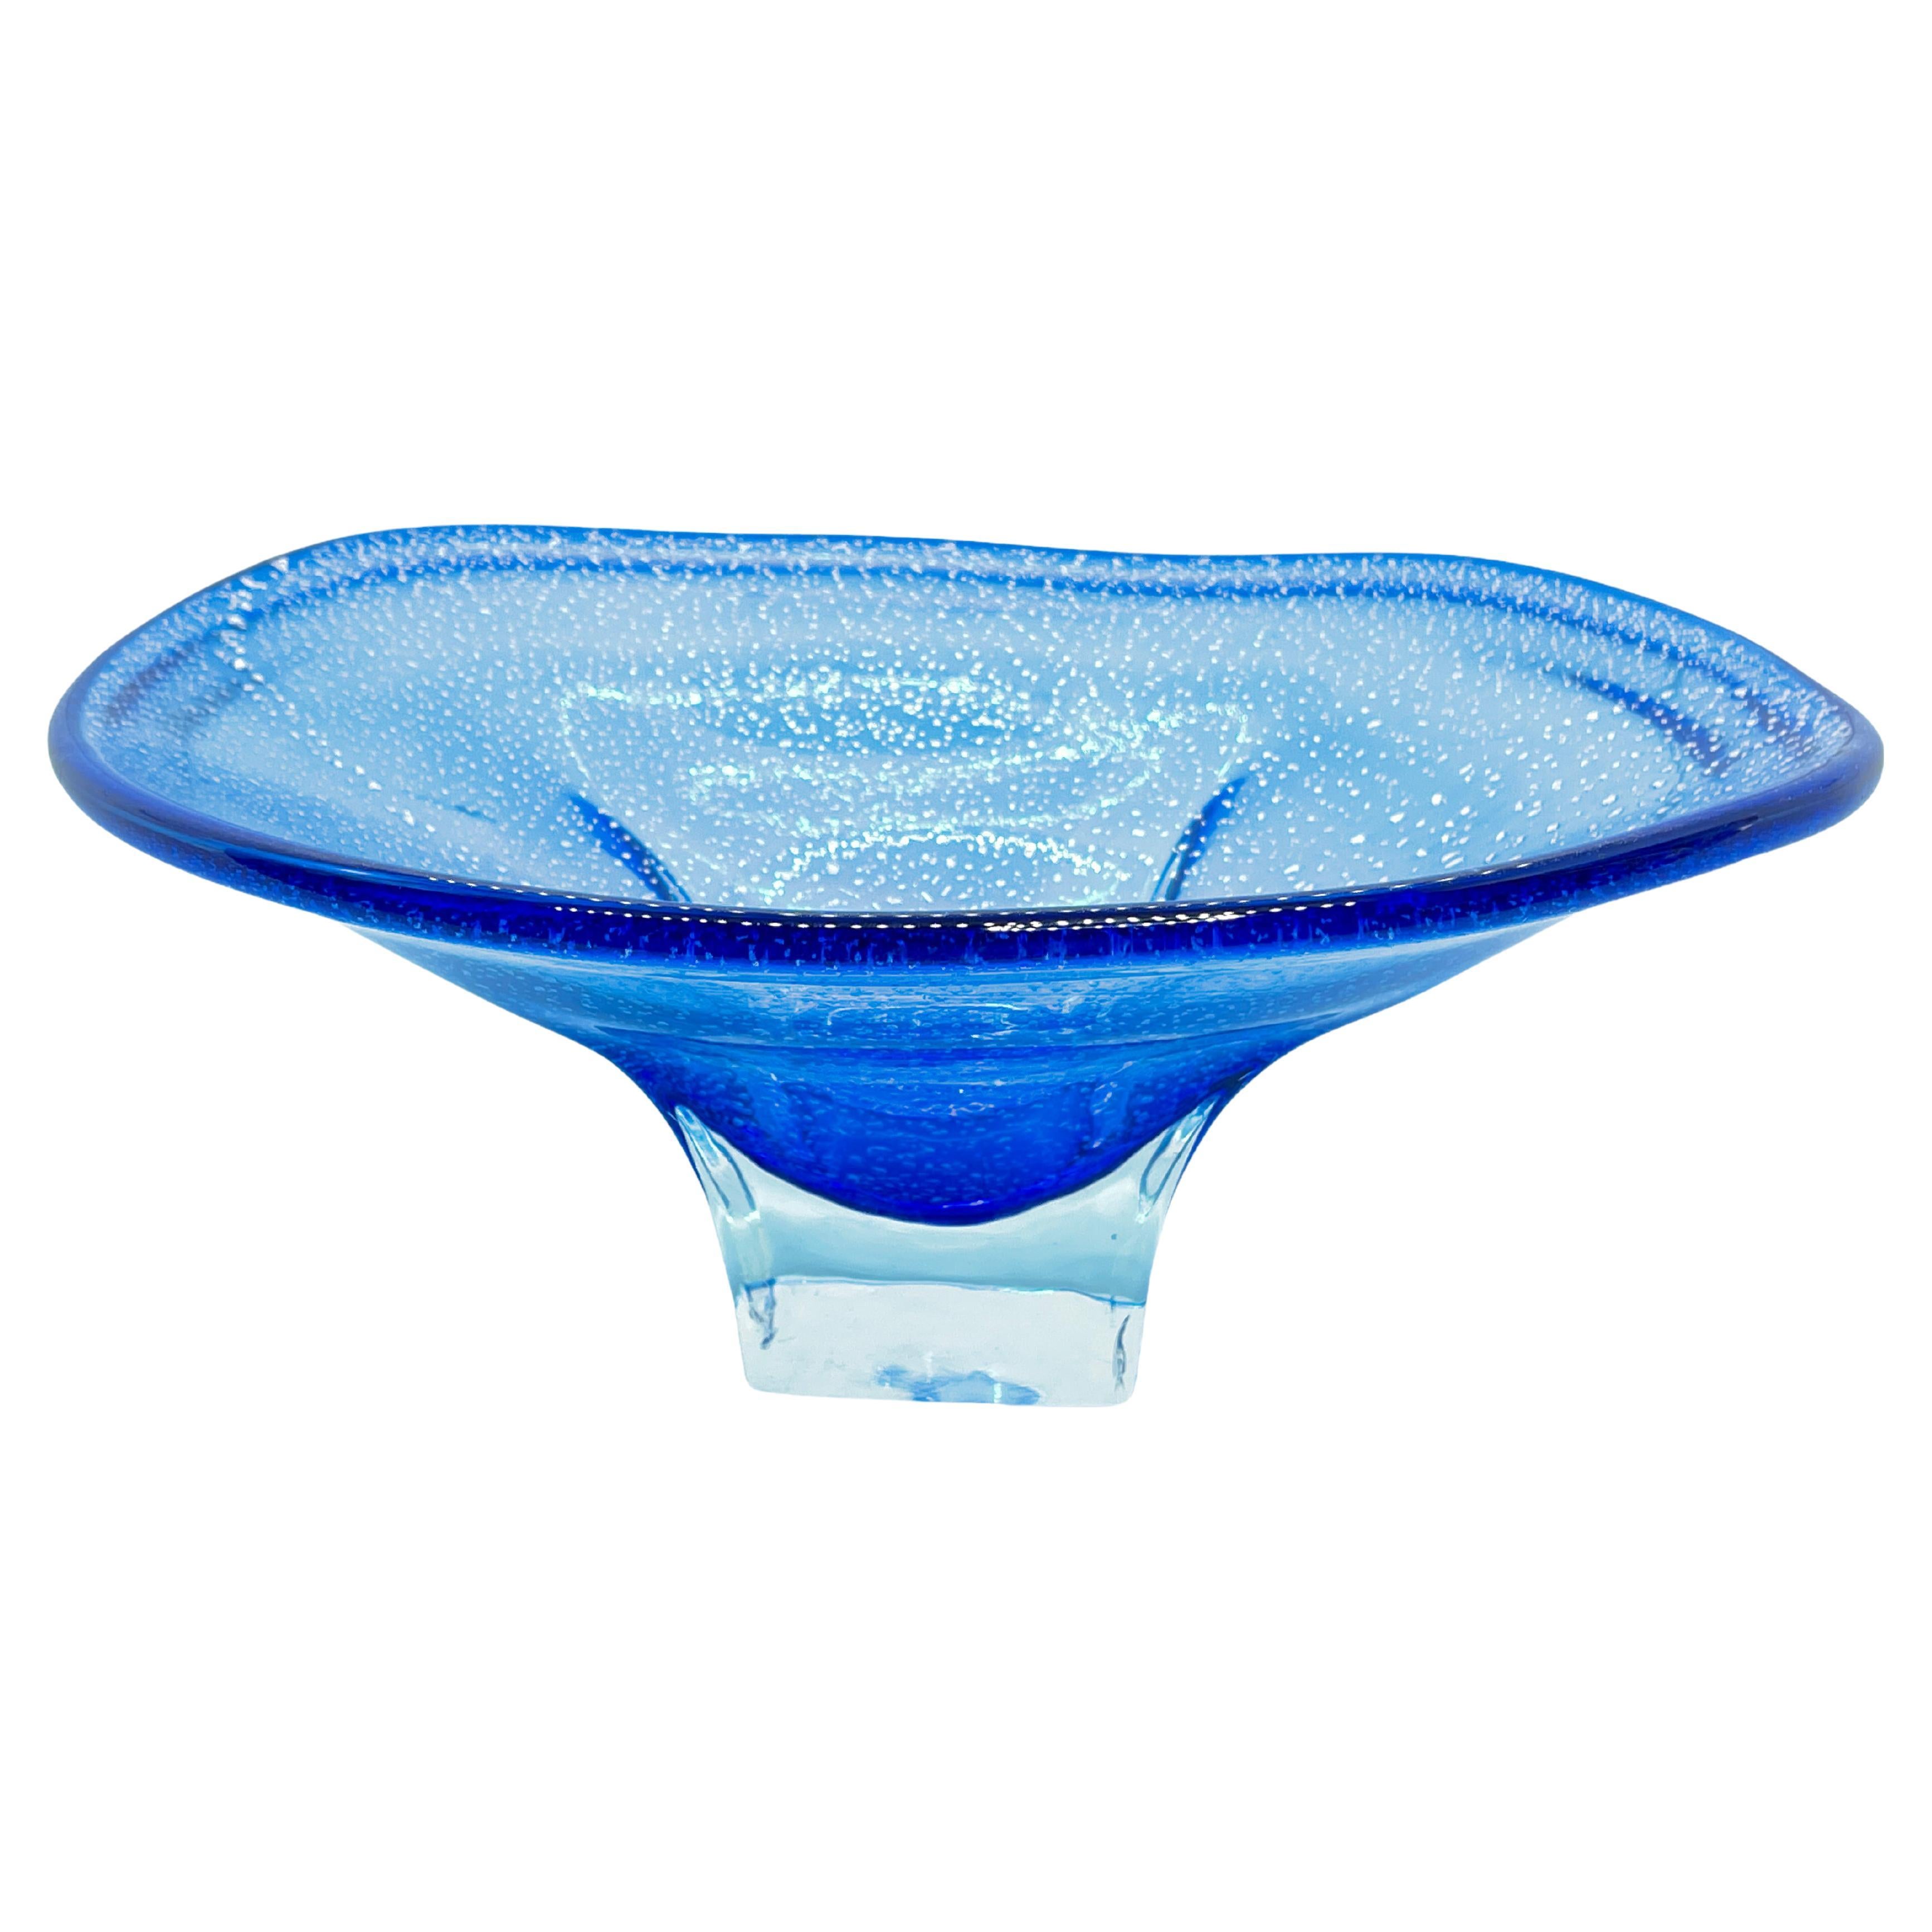 Stunning Murano Glass Bowl Catchall Blue and Clear, Vintage, Italy, 1980s